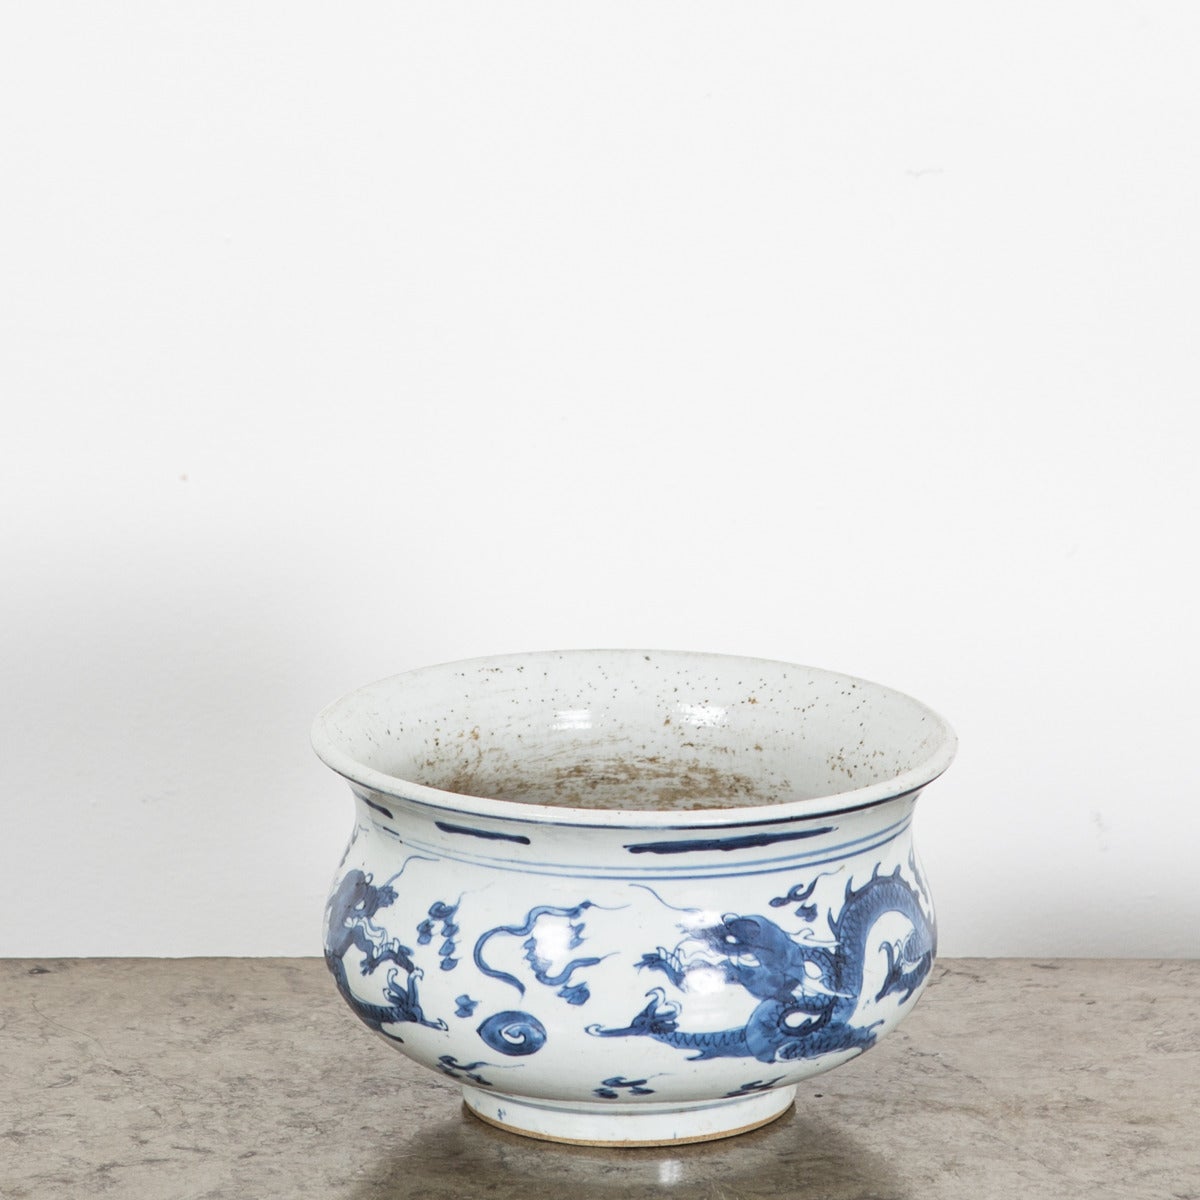 A cachepot decorated with blue and white dragon